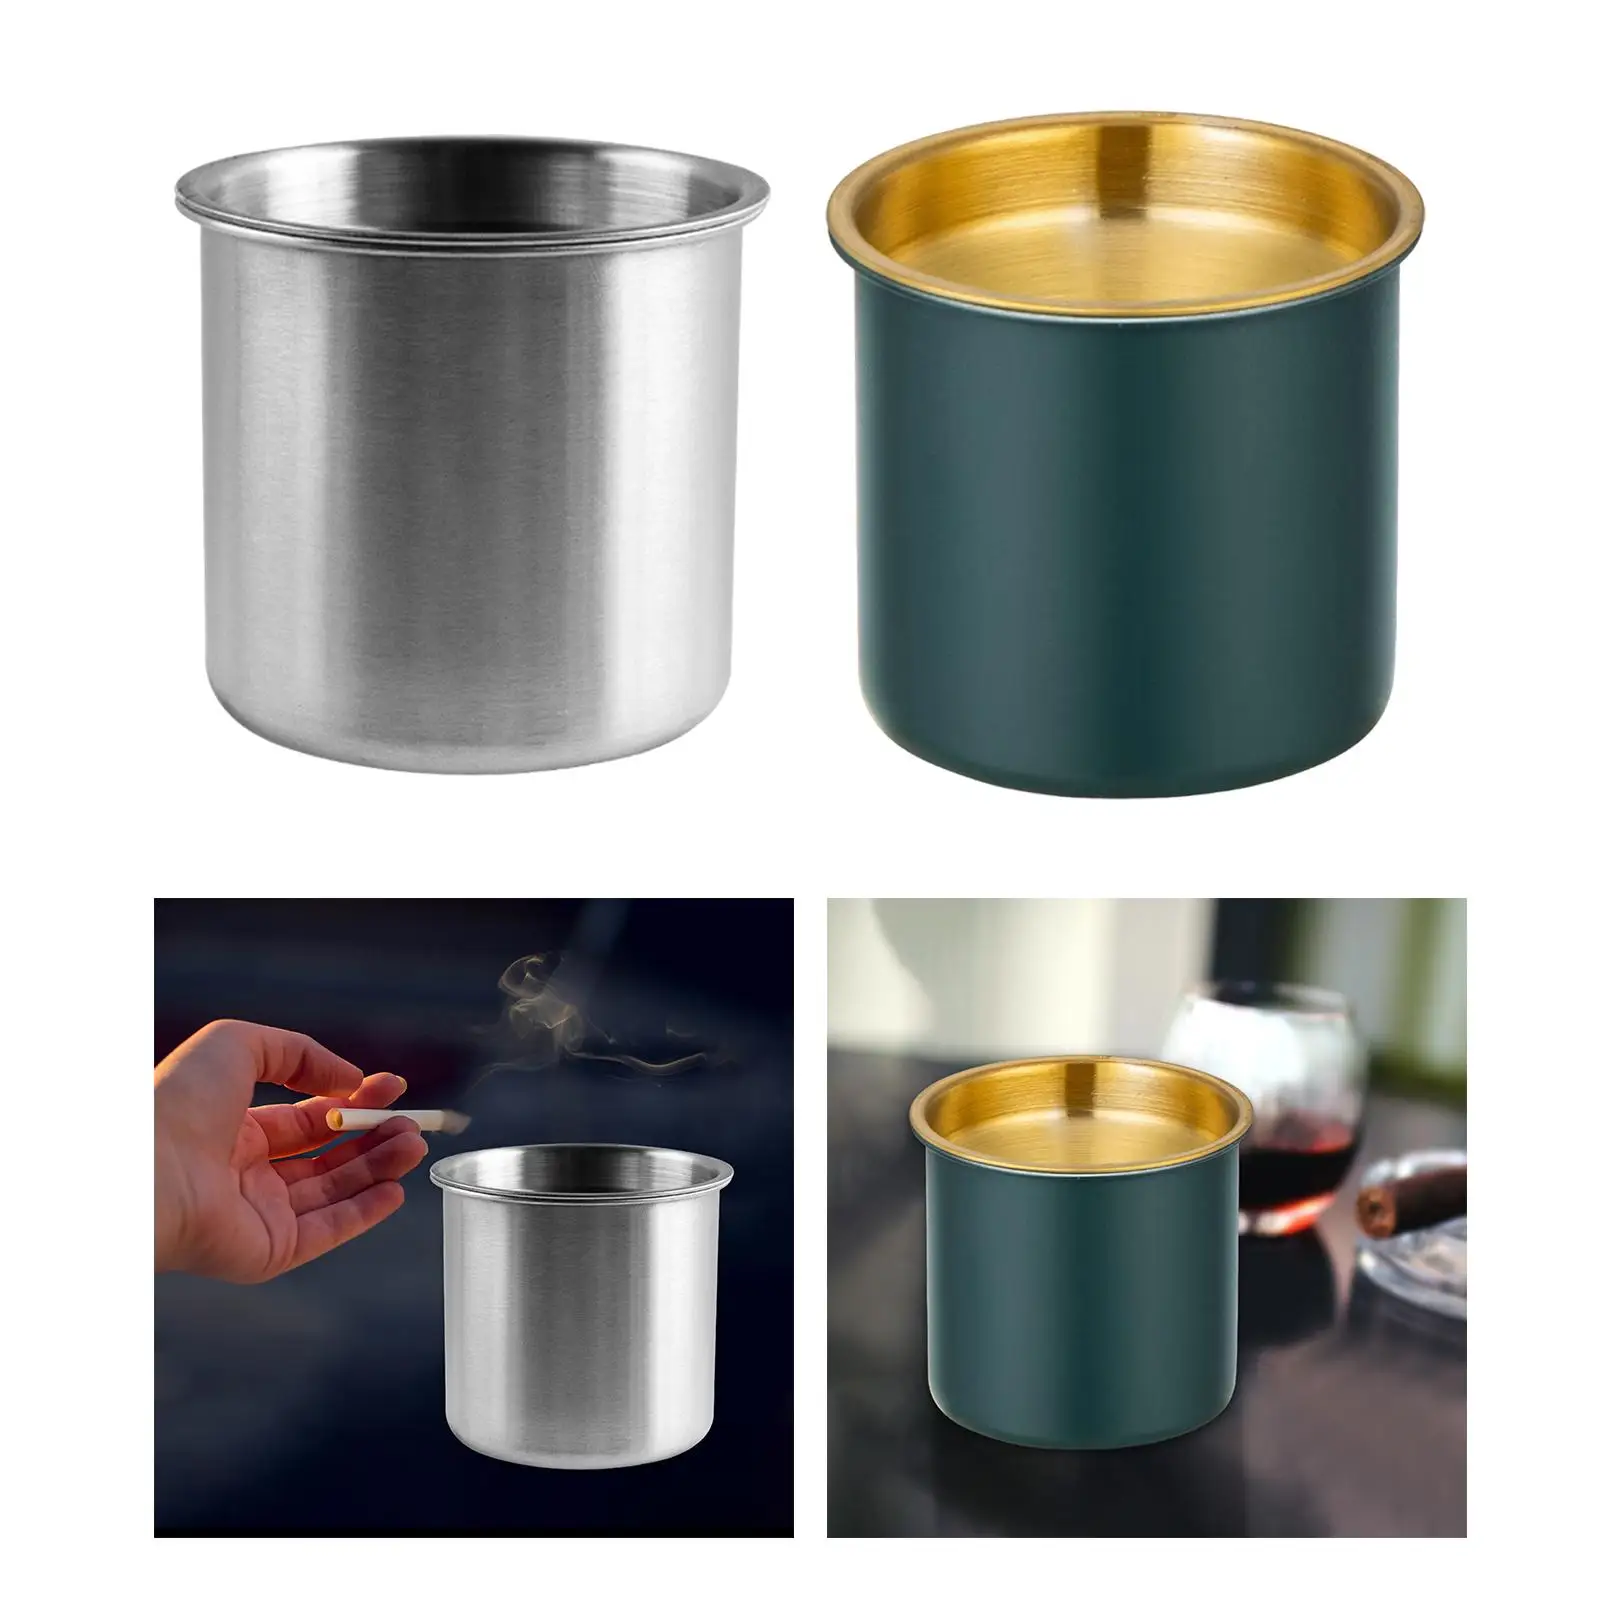 Large Ashtray Stainless Steel Funnel Design Cigarette Ashtray Cigarette Butt Container for Smokers Outside Patio Garden Office